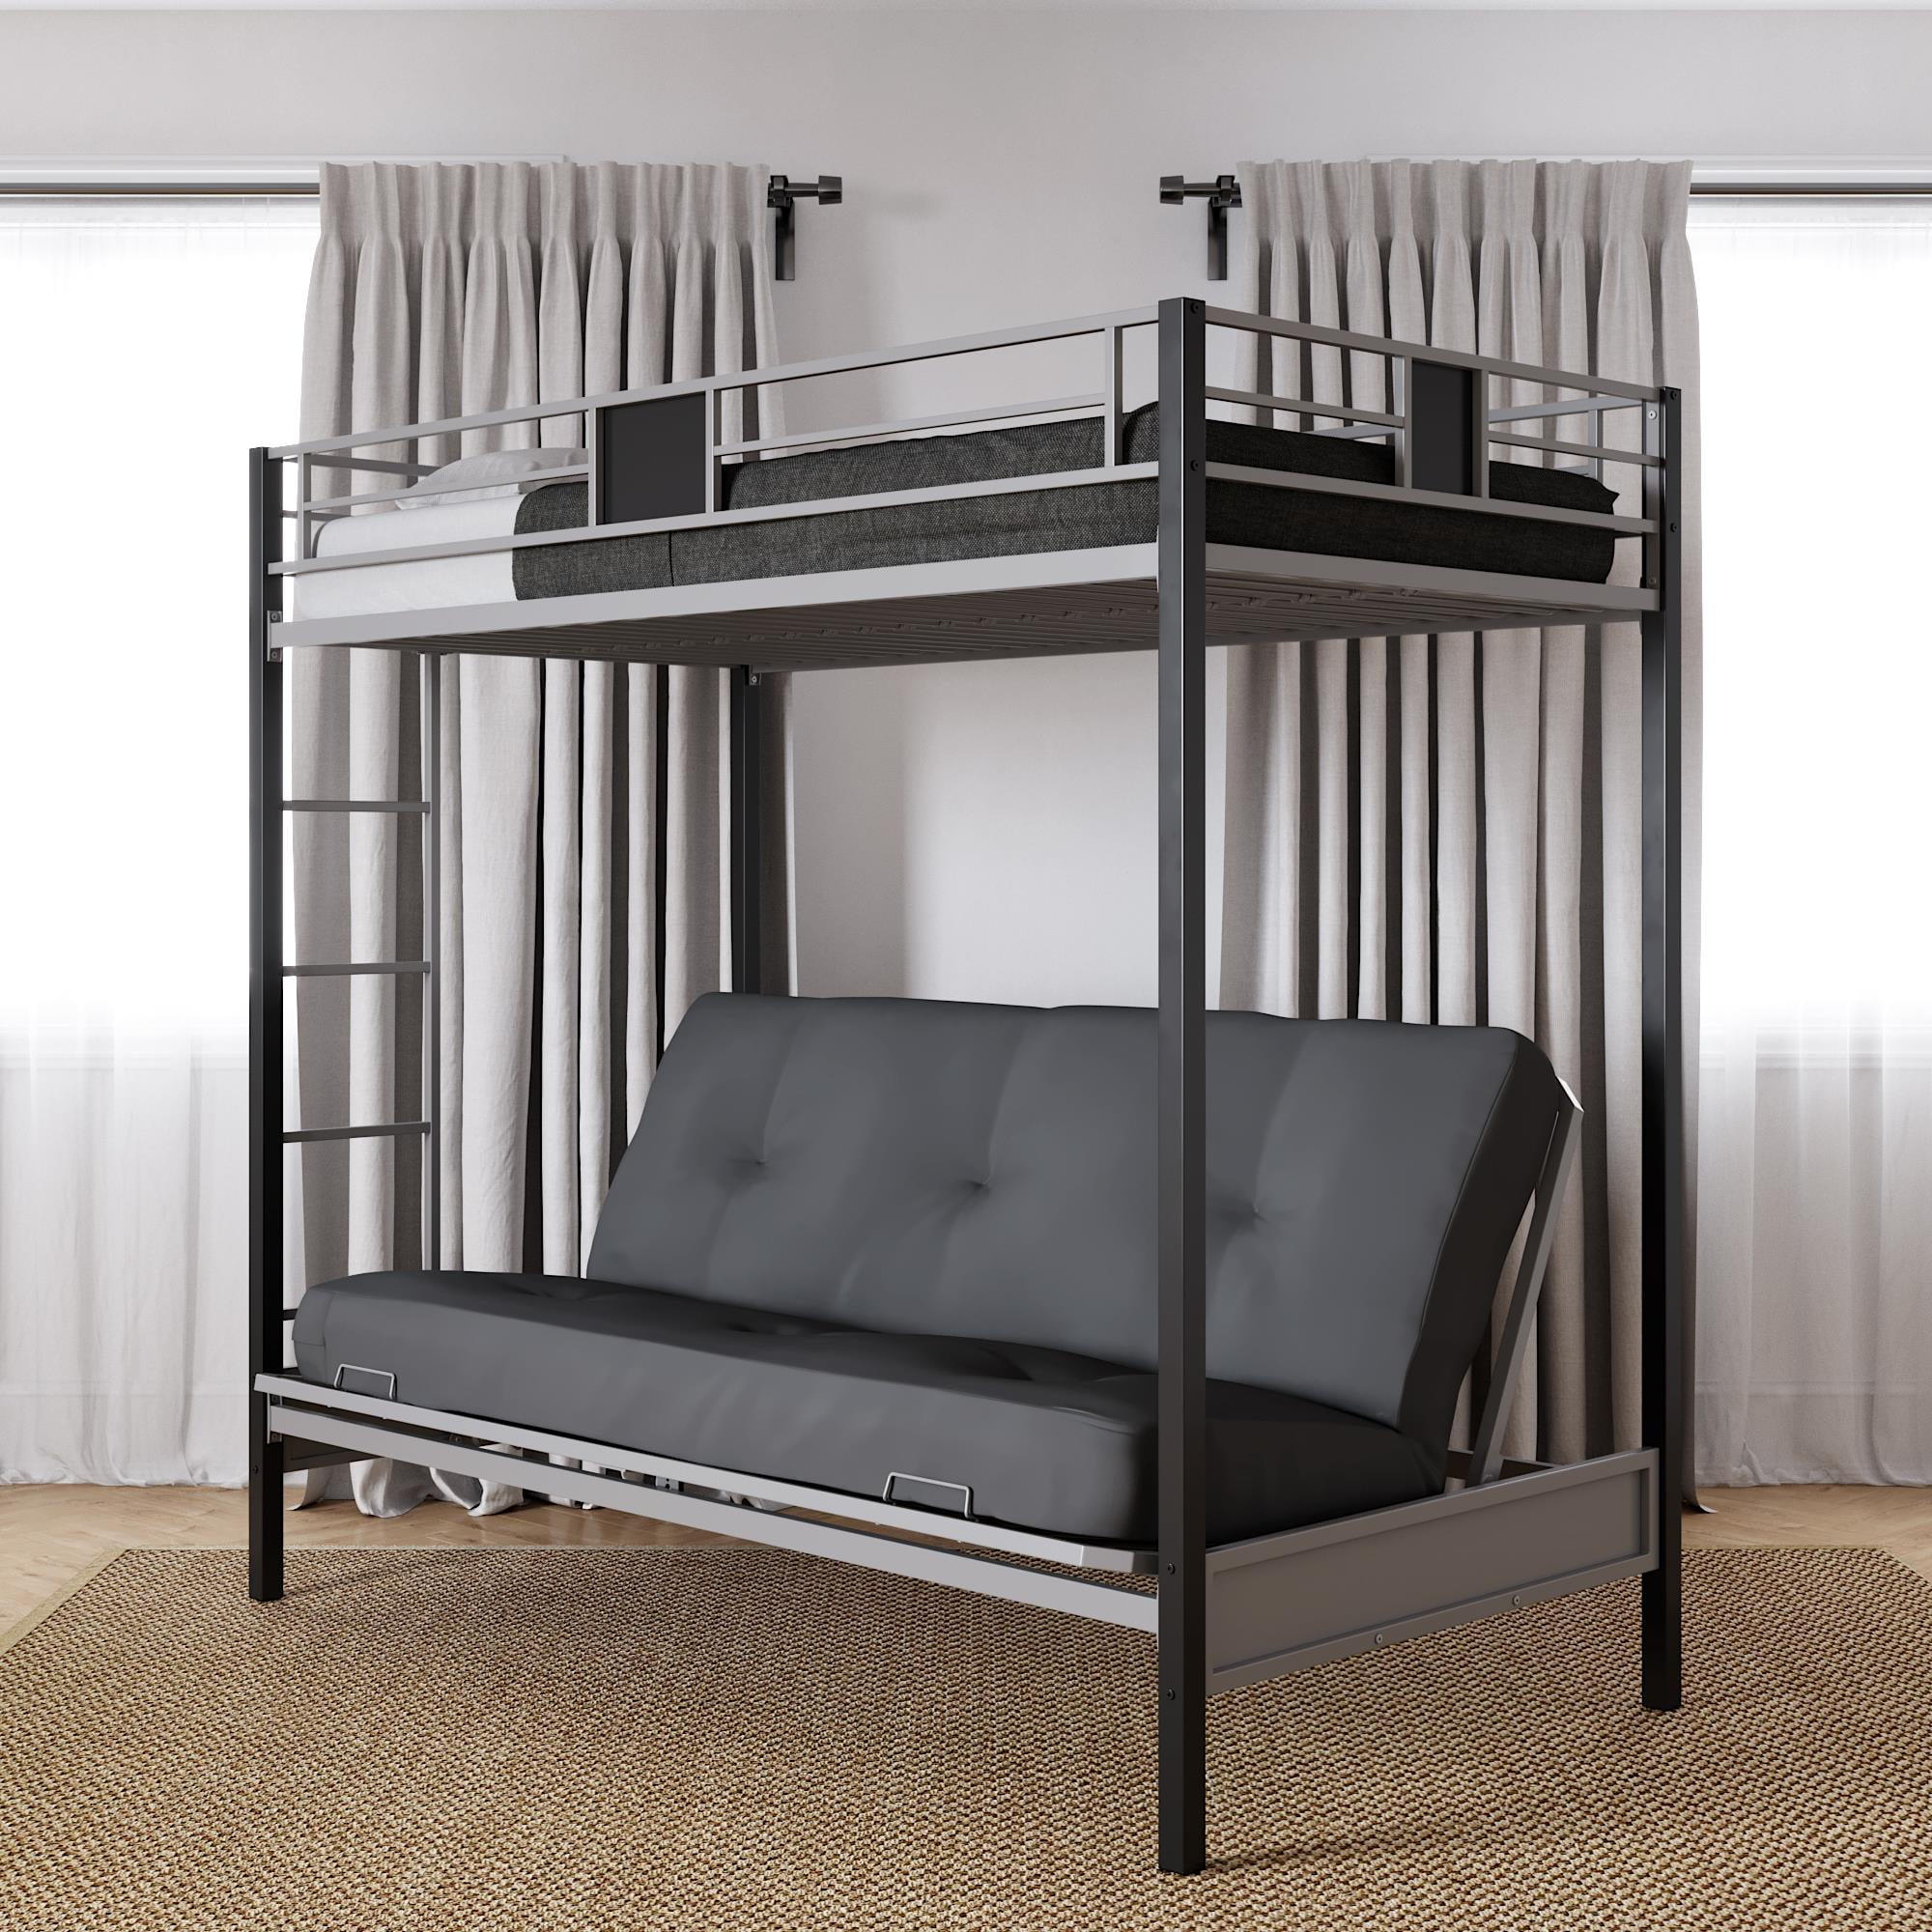 River Street Designs Silver Screen Twin, Rooms To Go Bunk Bed With Futon